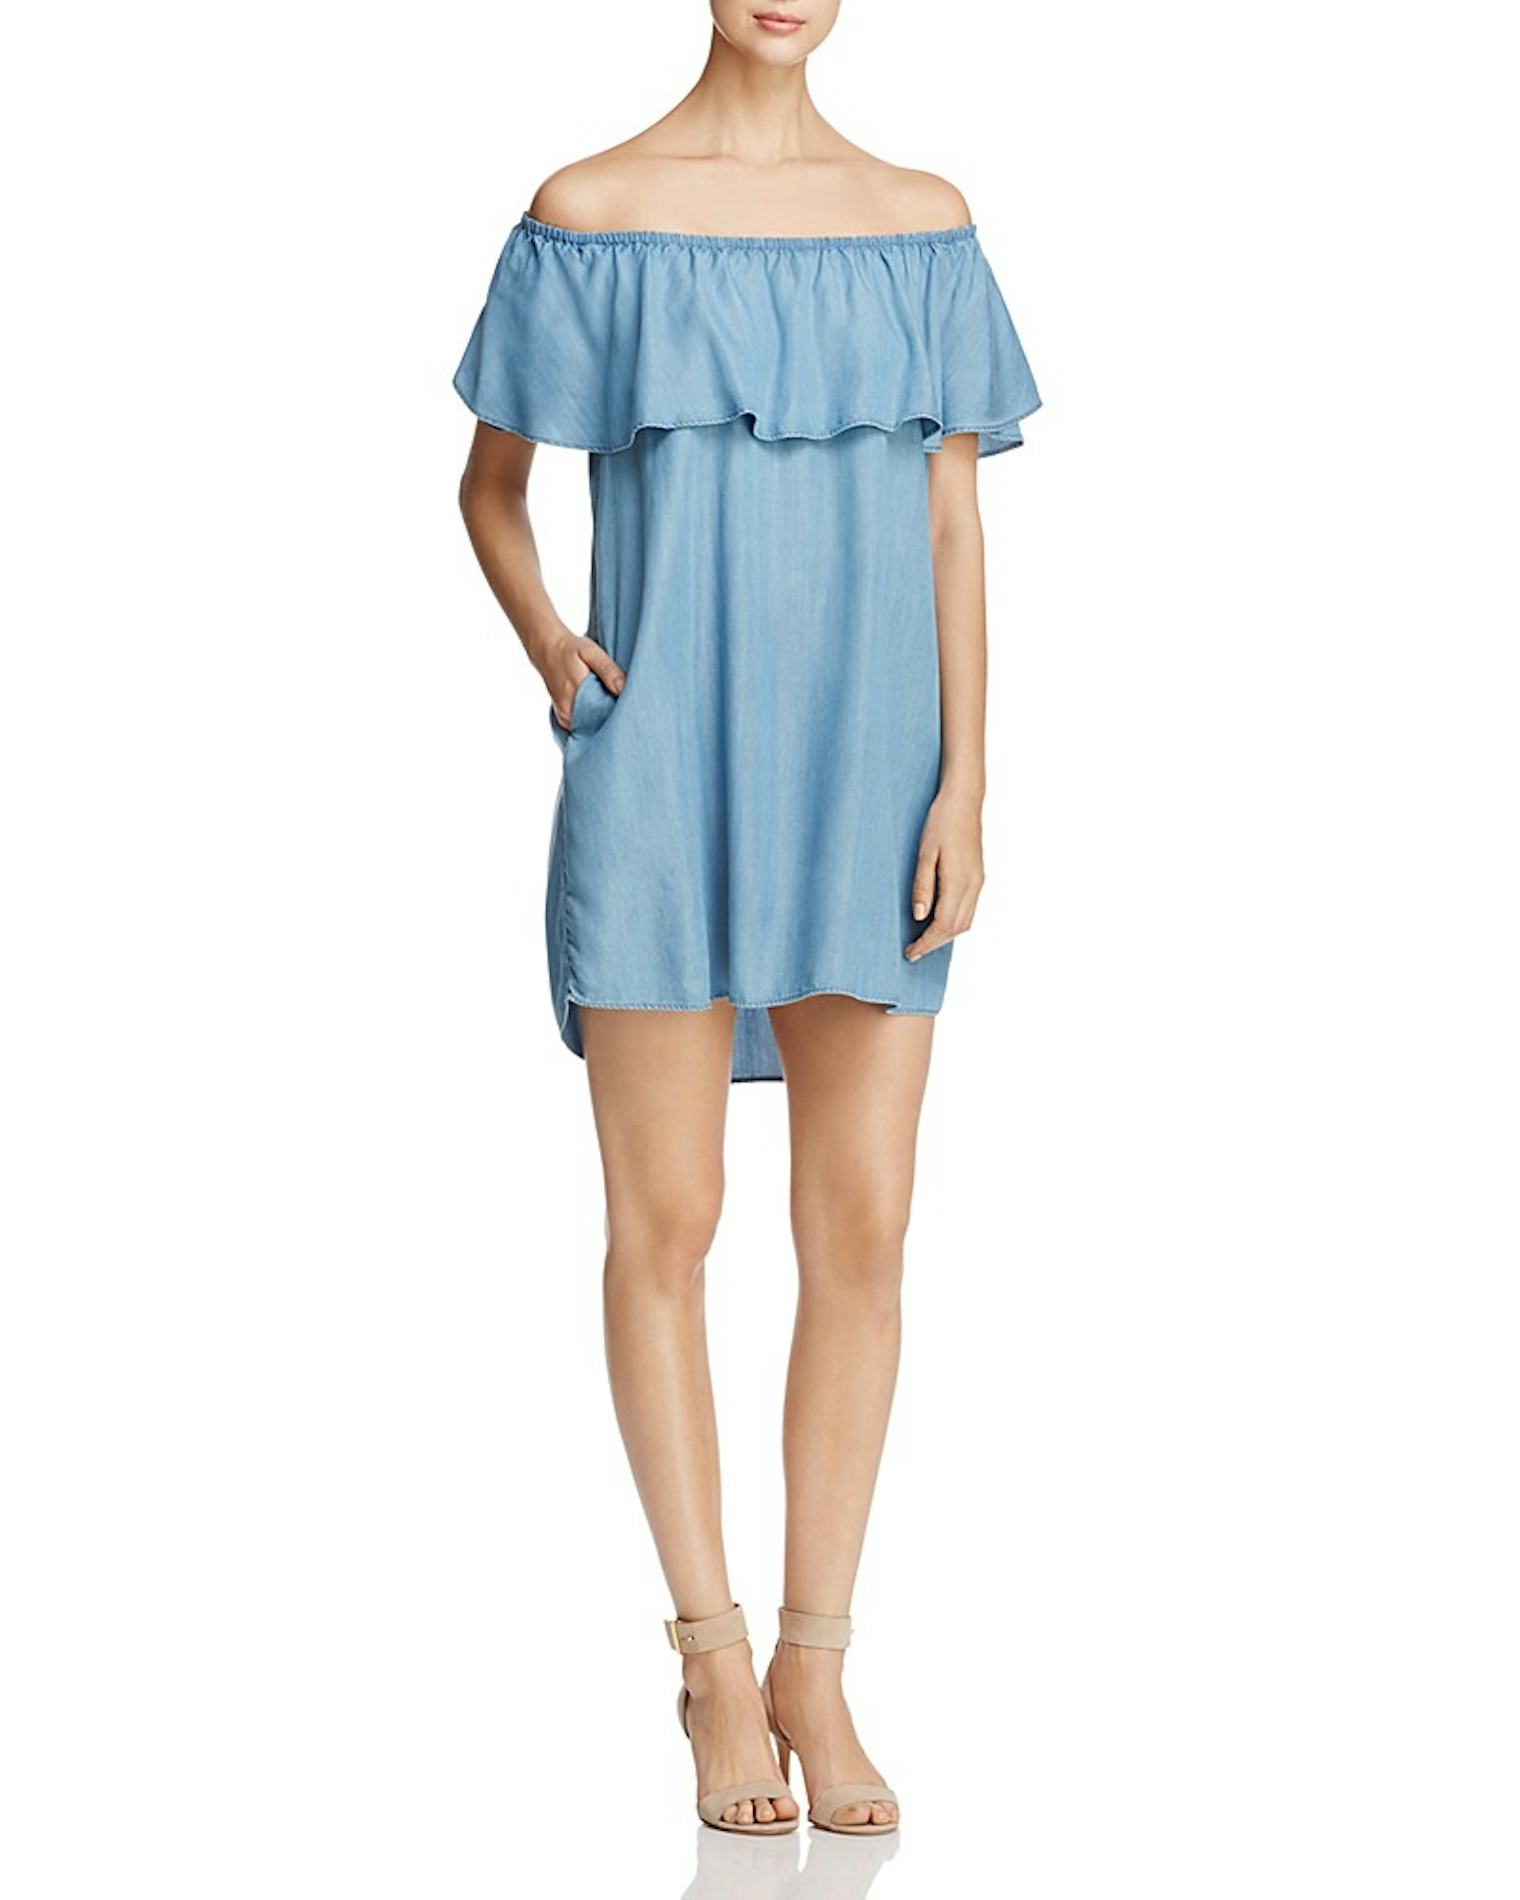 This Blue Off-The-Shoulder Zara Dress Is So Popular, There's A Website ...